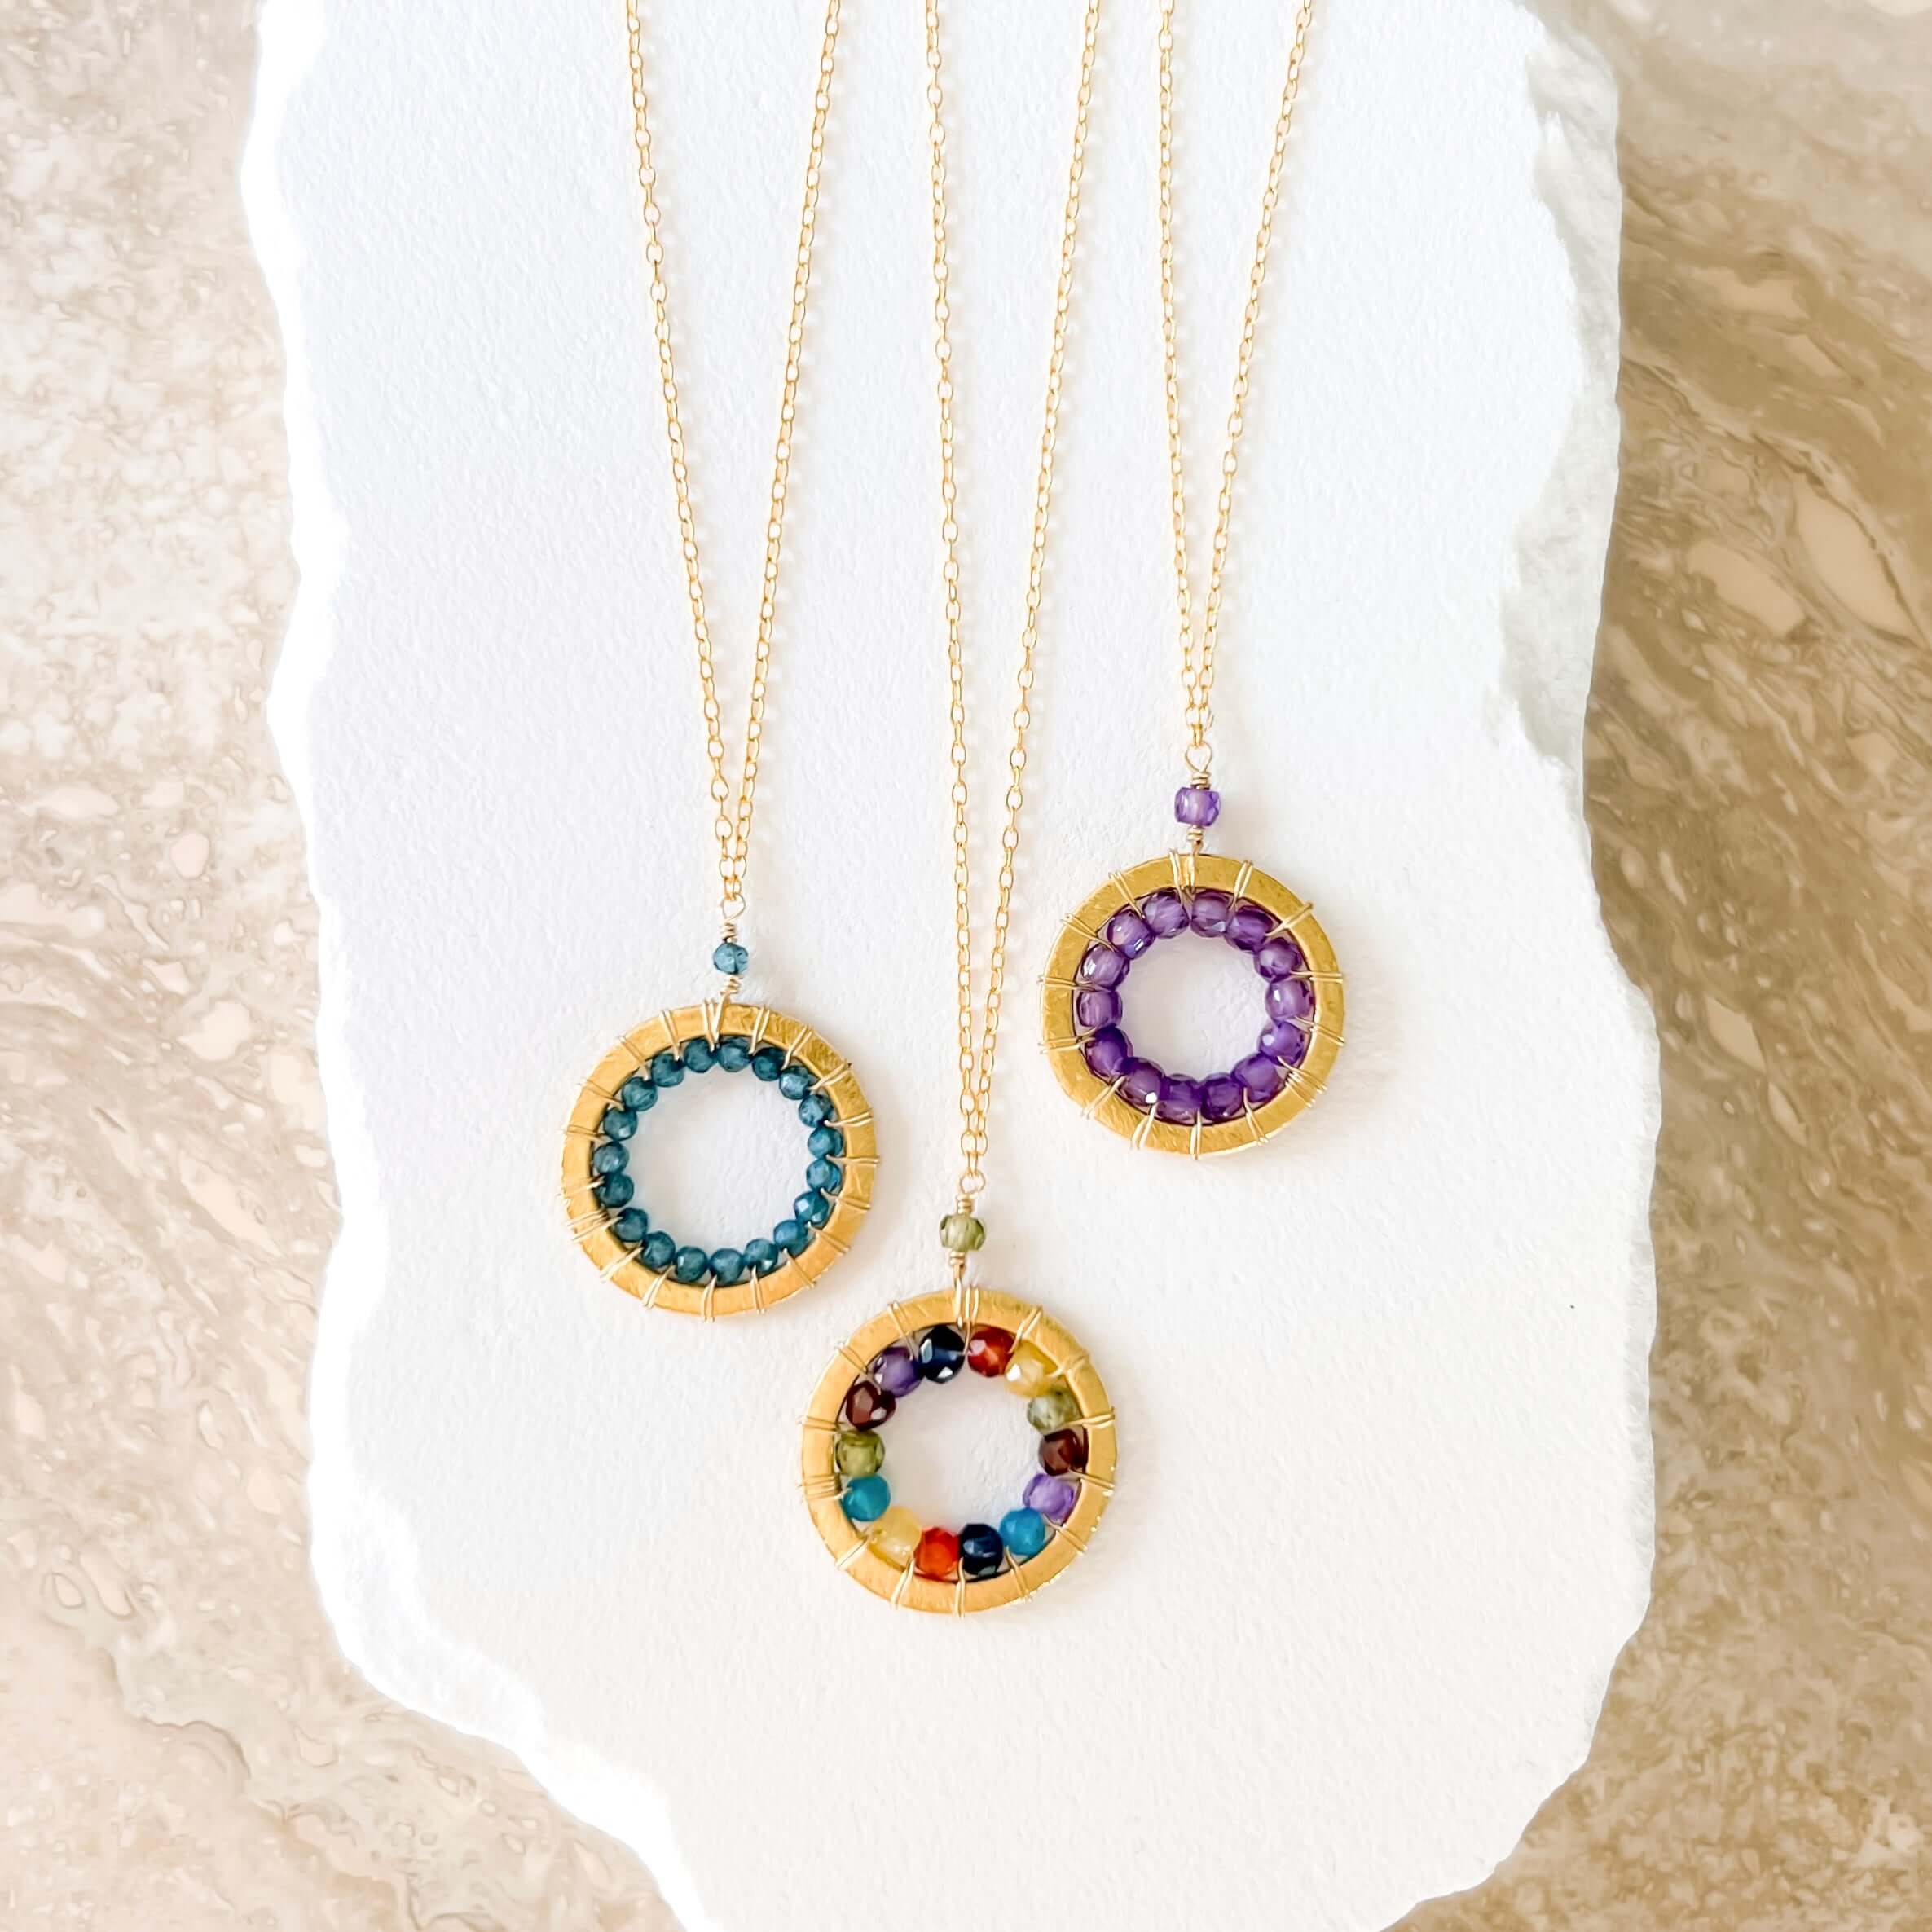 Gold Handmade Necklaces  with London Blue Quartz, a Rainbow of Gems, or Beautiful Purple Amethyst Stones